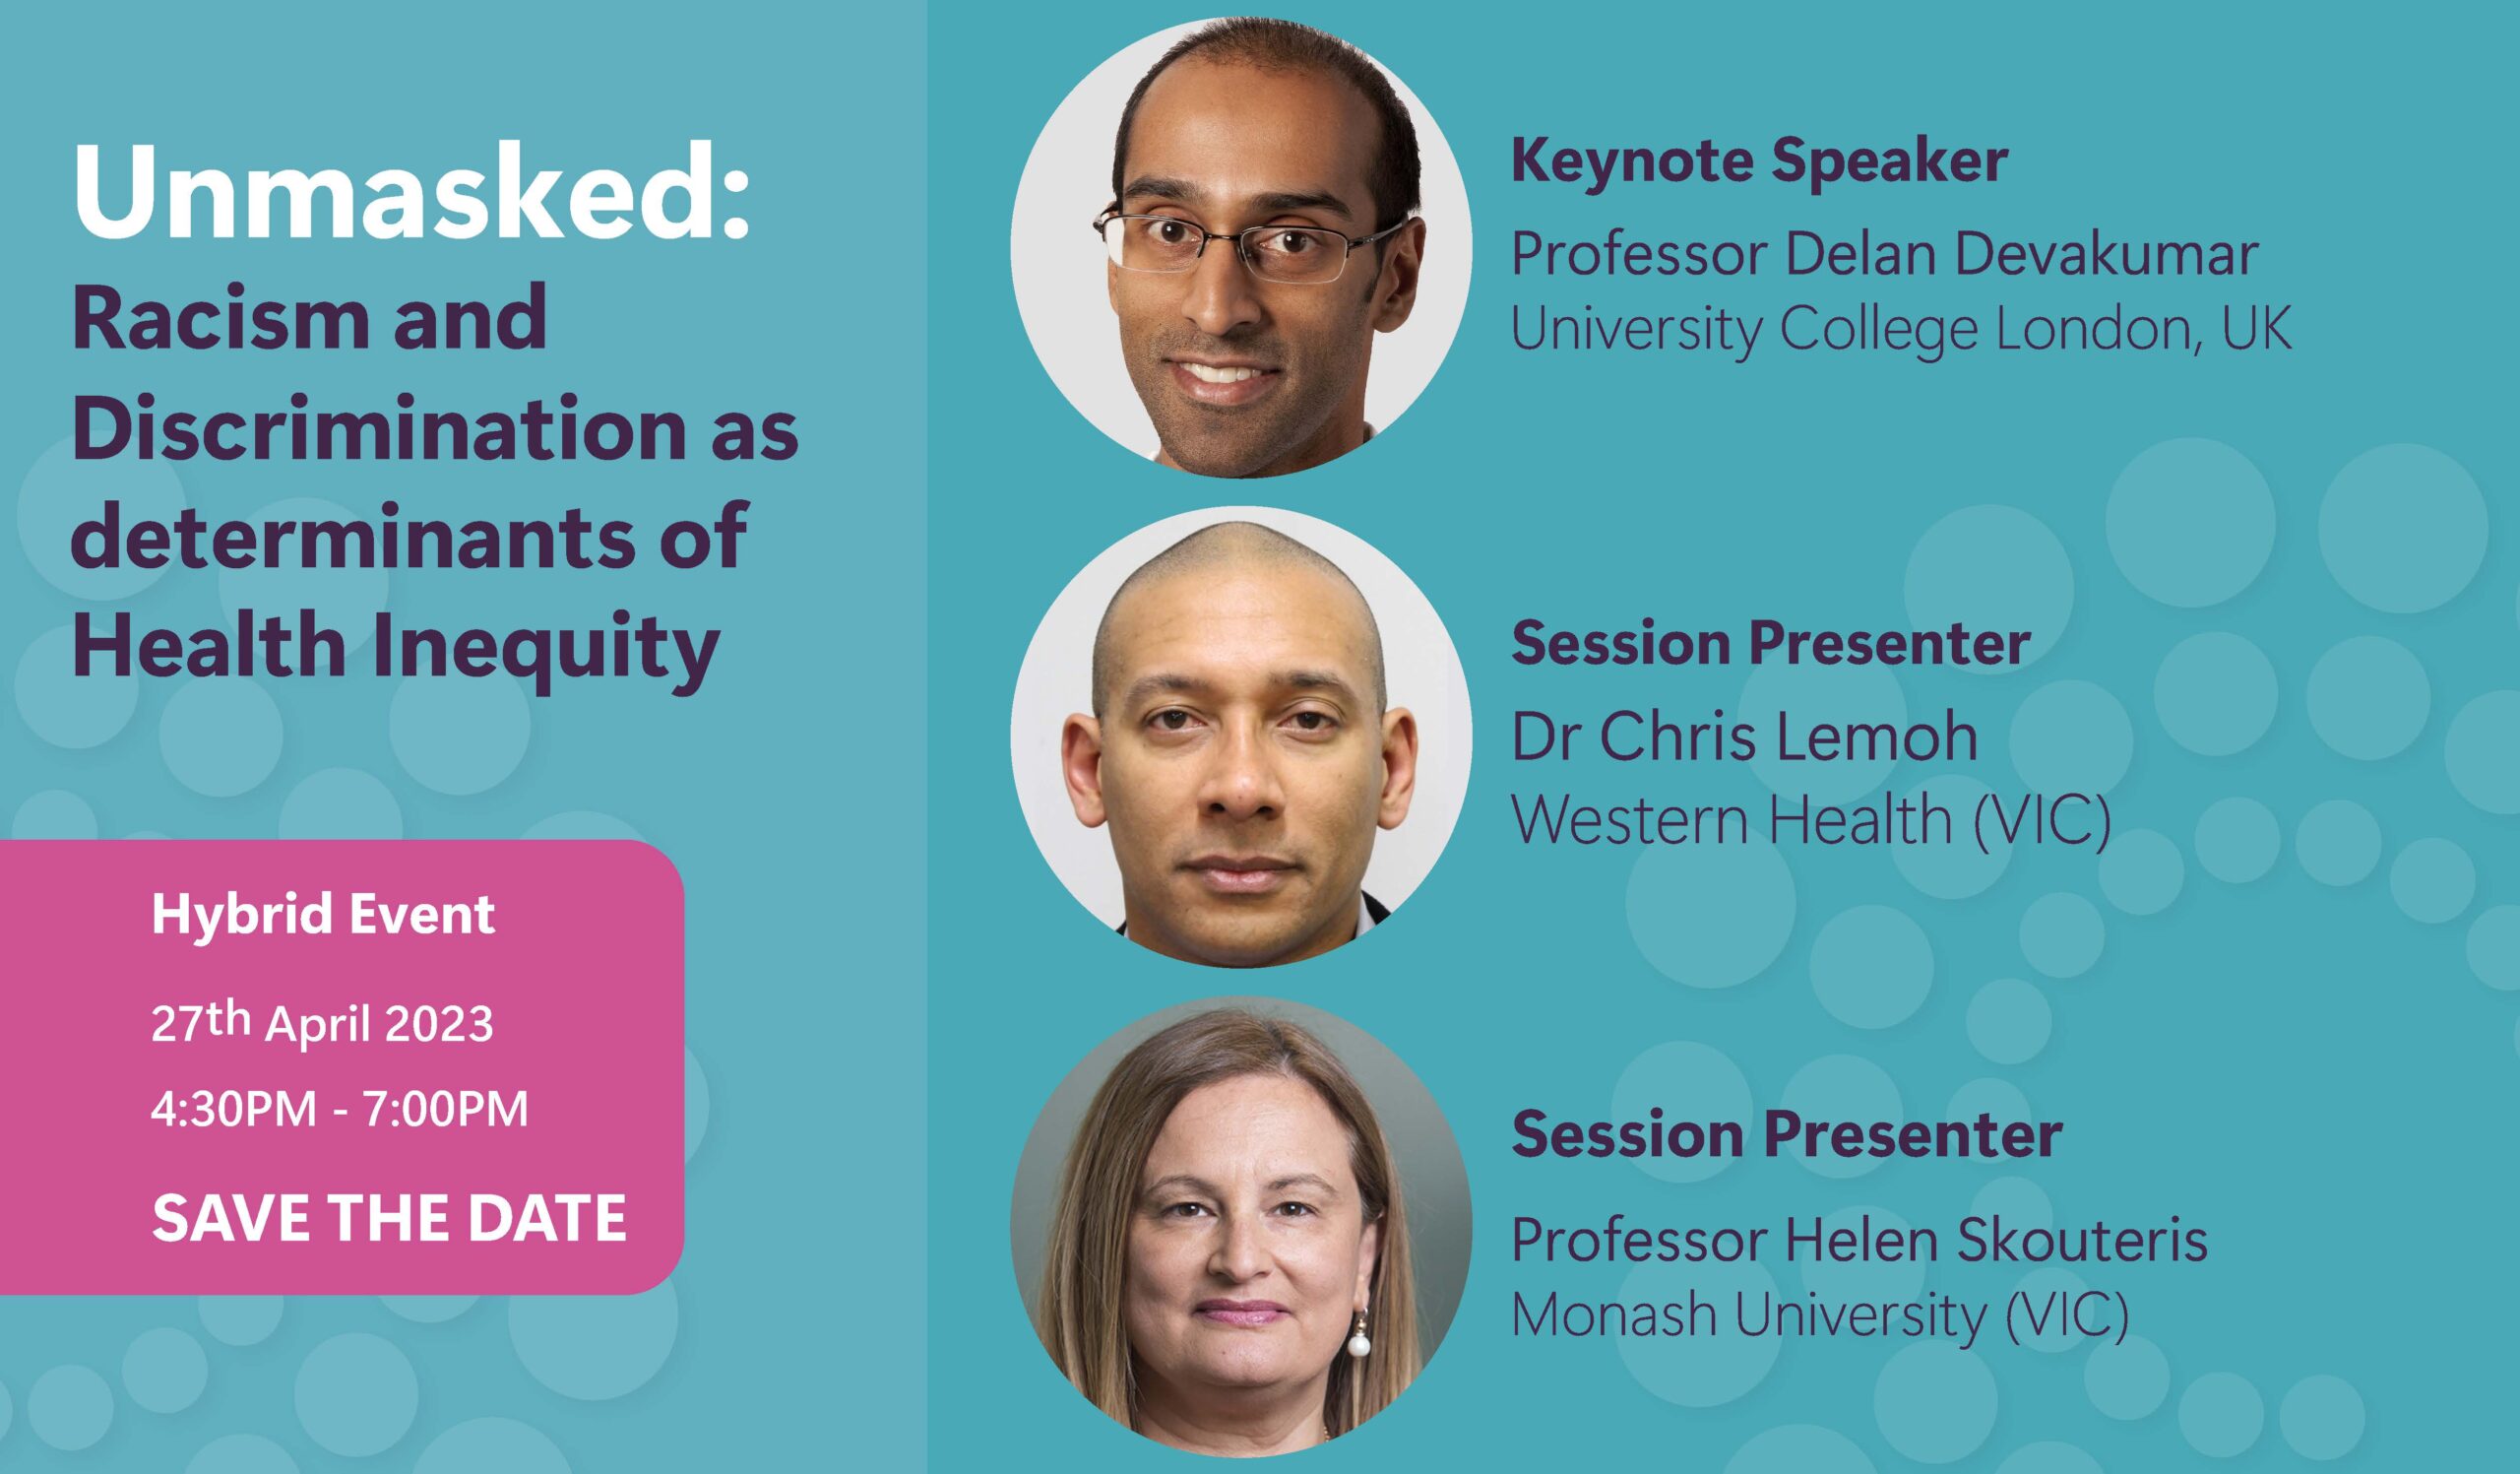 Unmasked: Racism and Discrimination as Determinants of Health Inequity